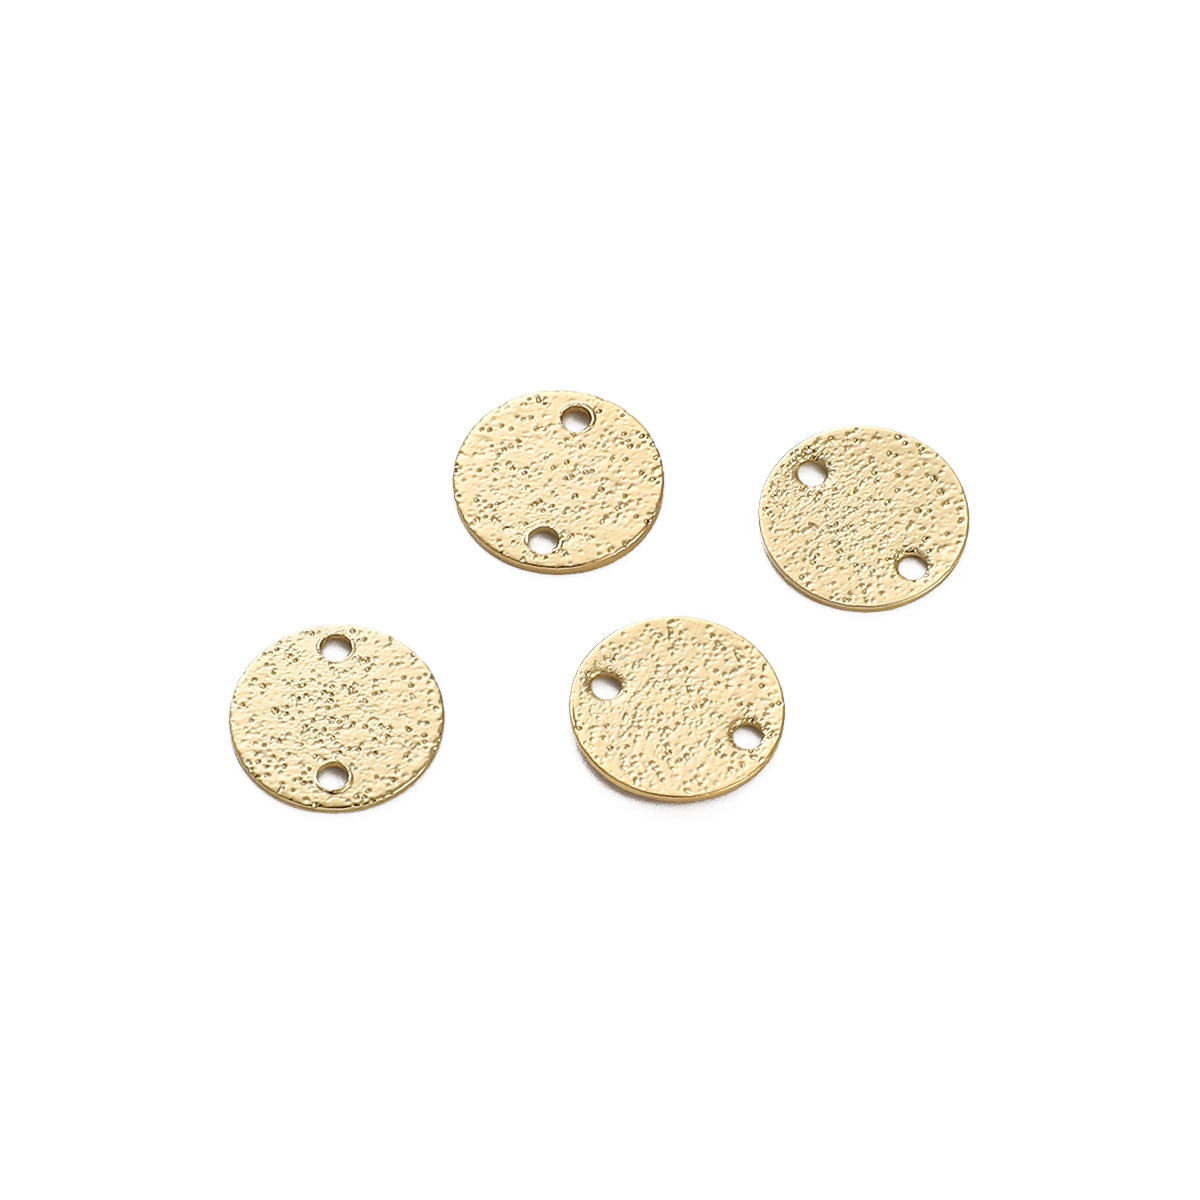 3:Double hole flat disc 10mm